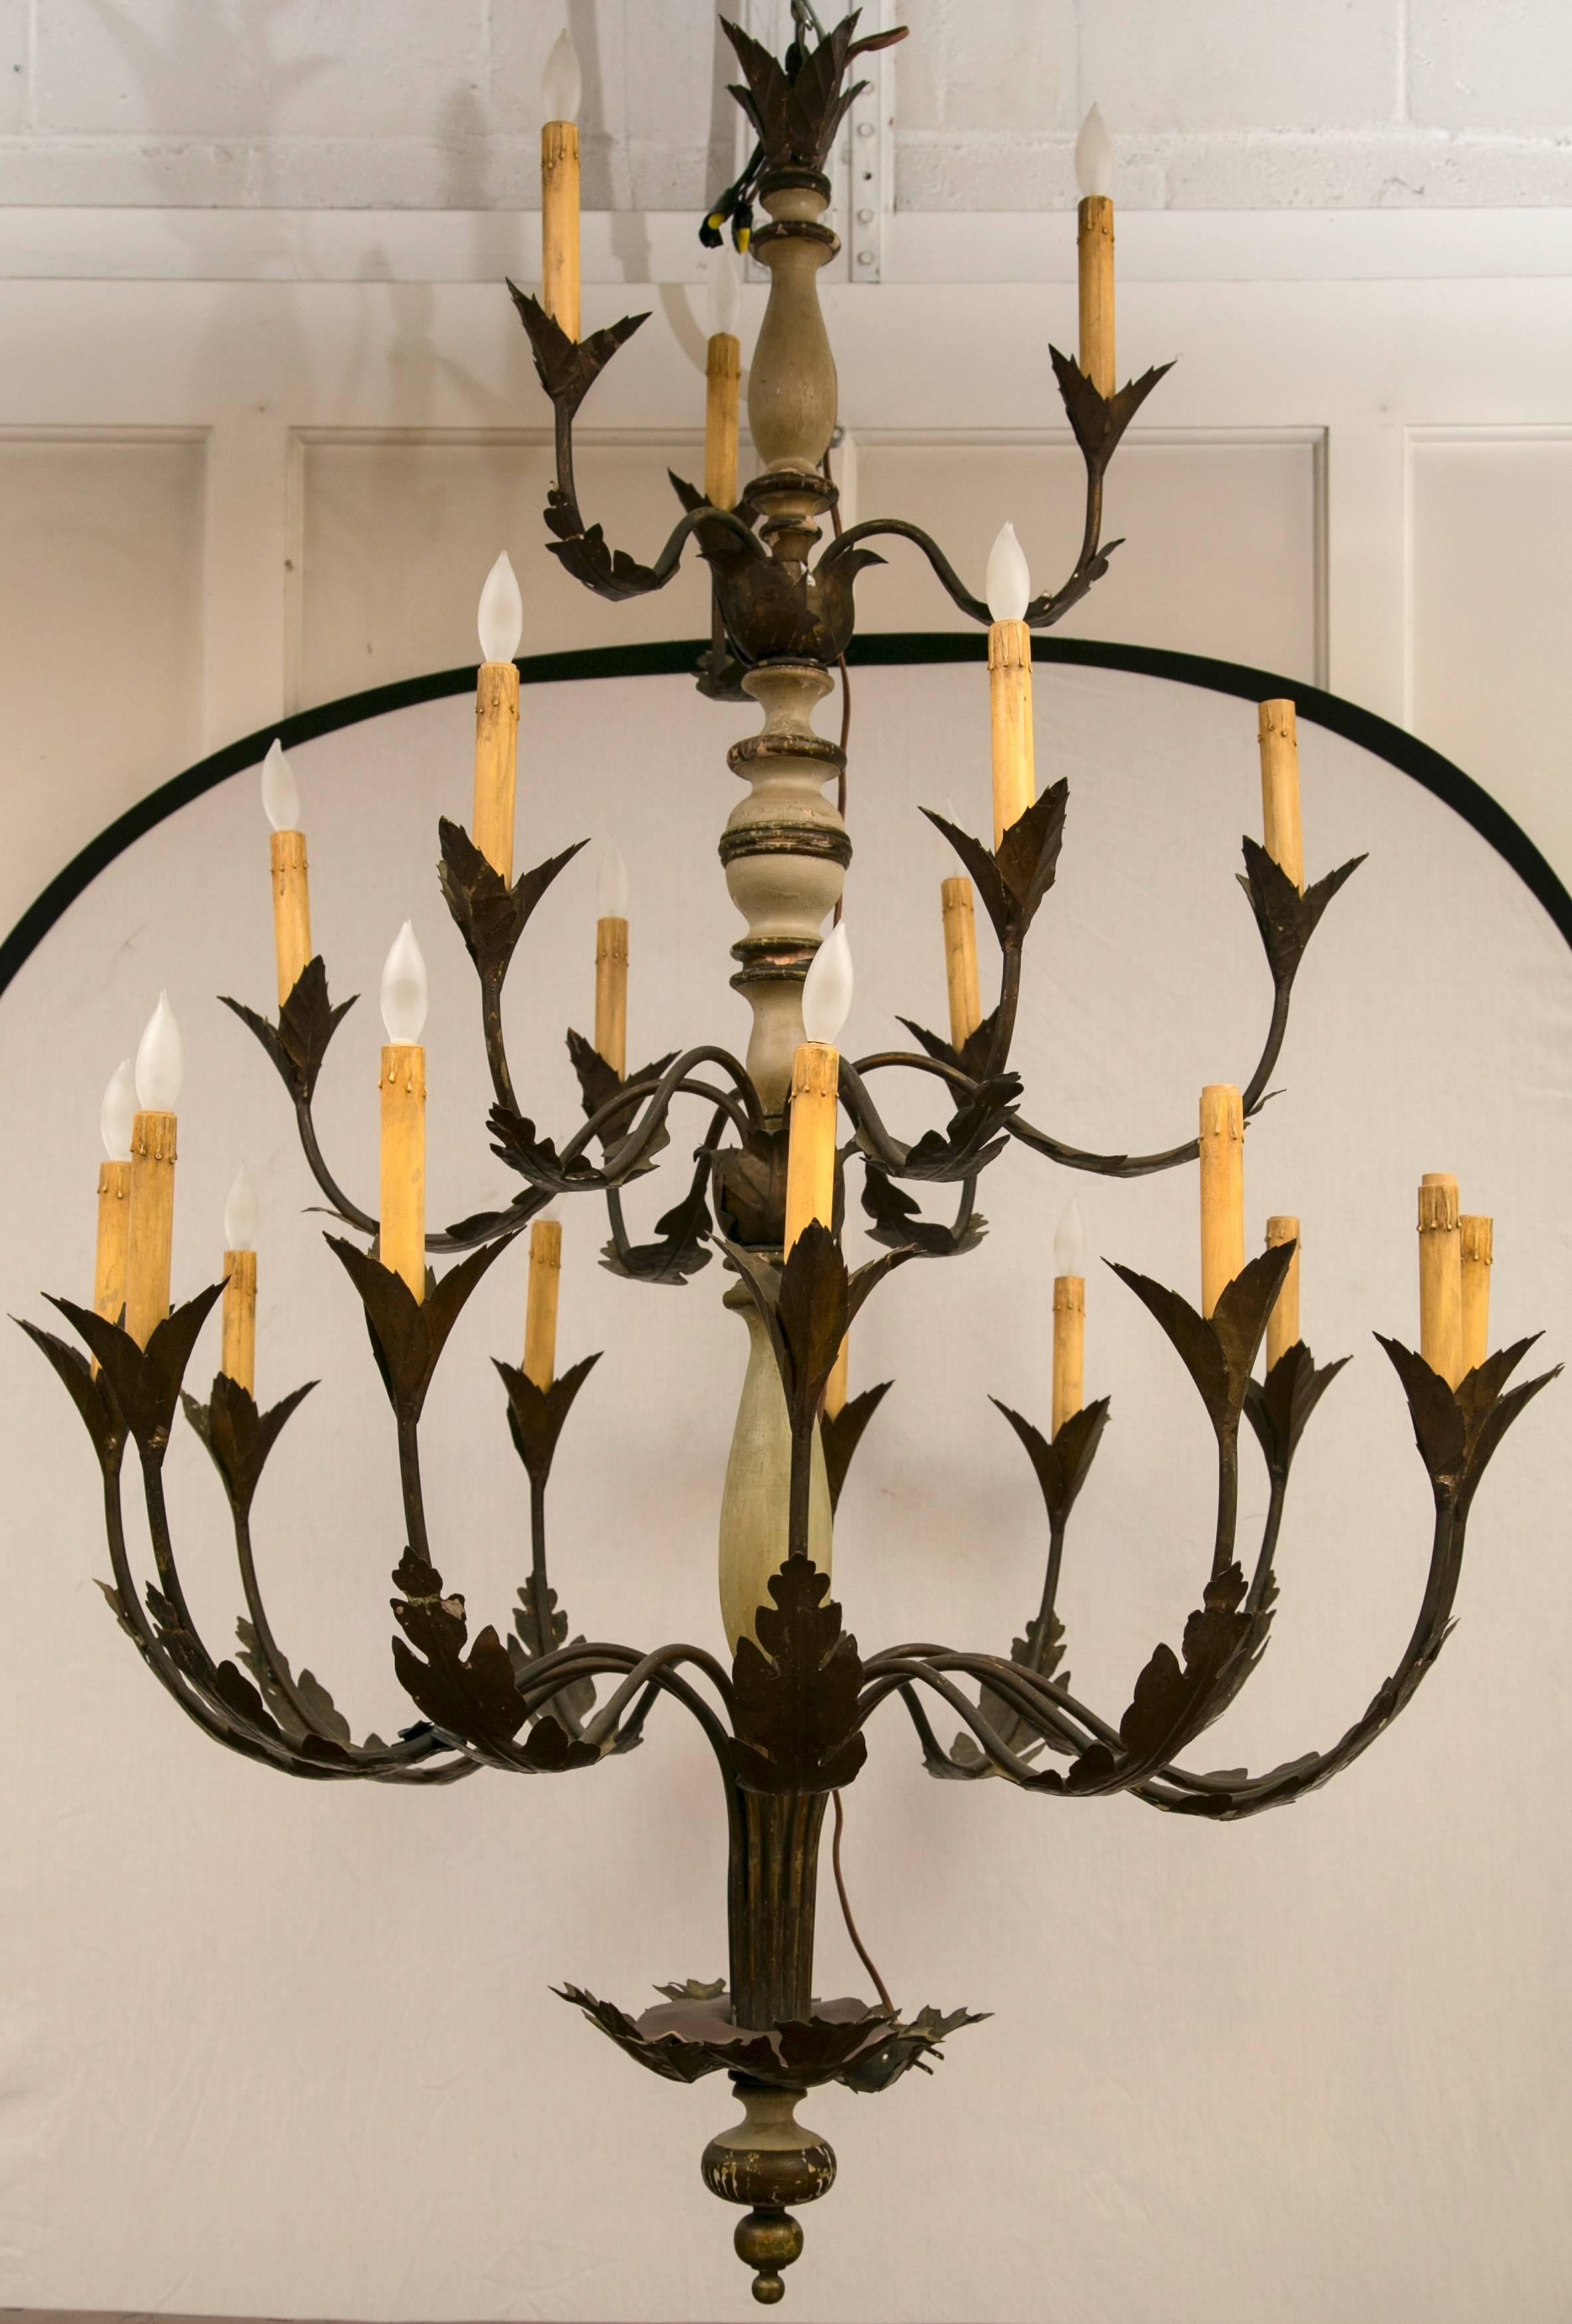 Handcrafted chandelier with 3 tiers and 21 electrified arms. Gilt metal arms surrounding a painted wood center.